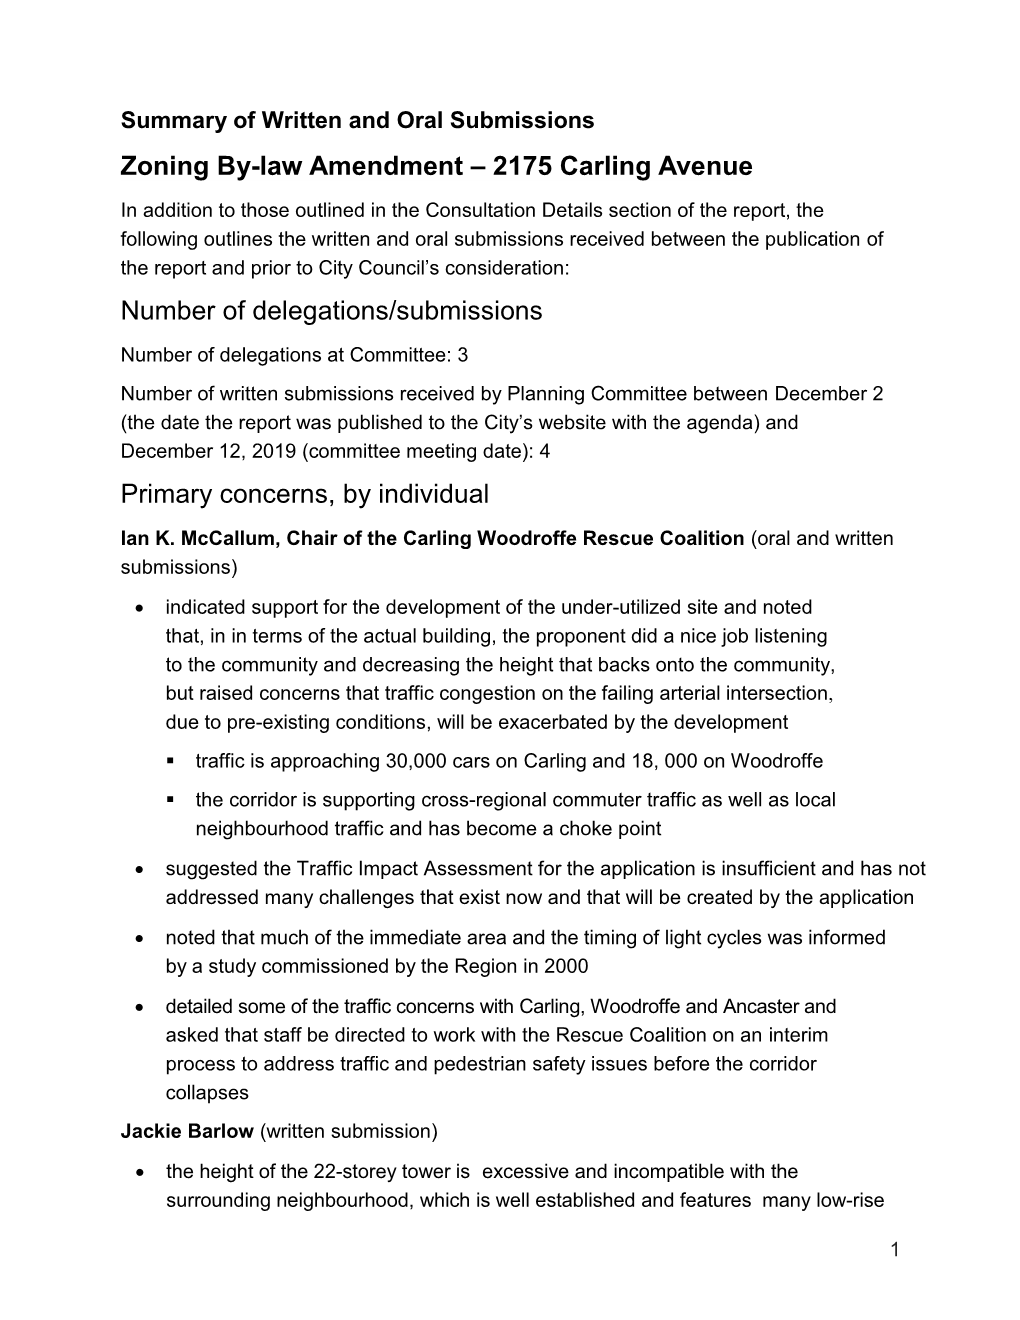 Summary of Submissions, Zoning By-Law Amendment –2175 Carling Avenue